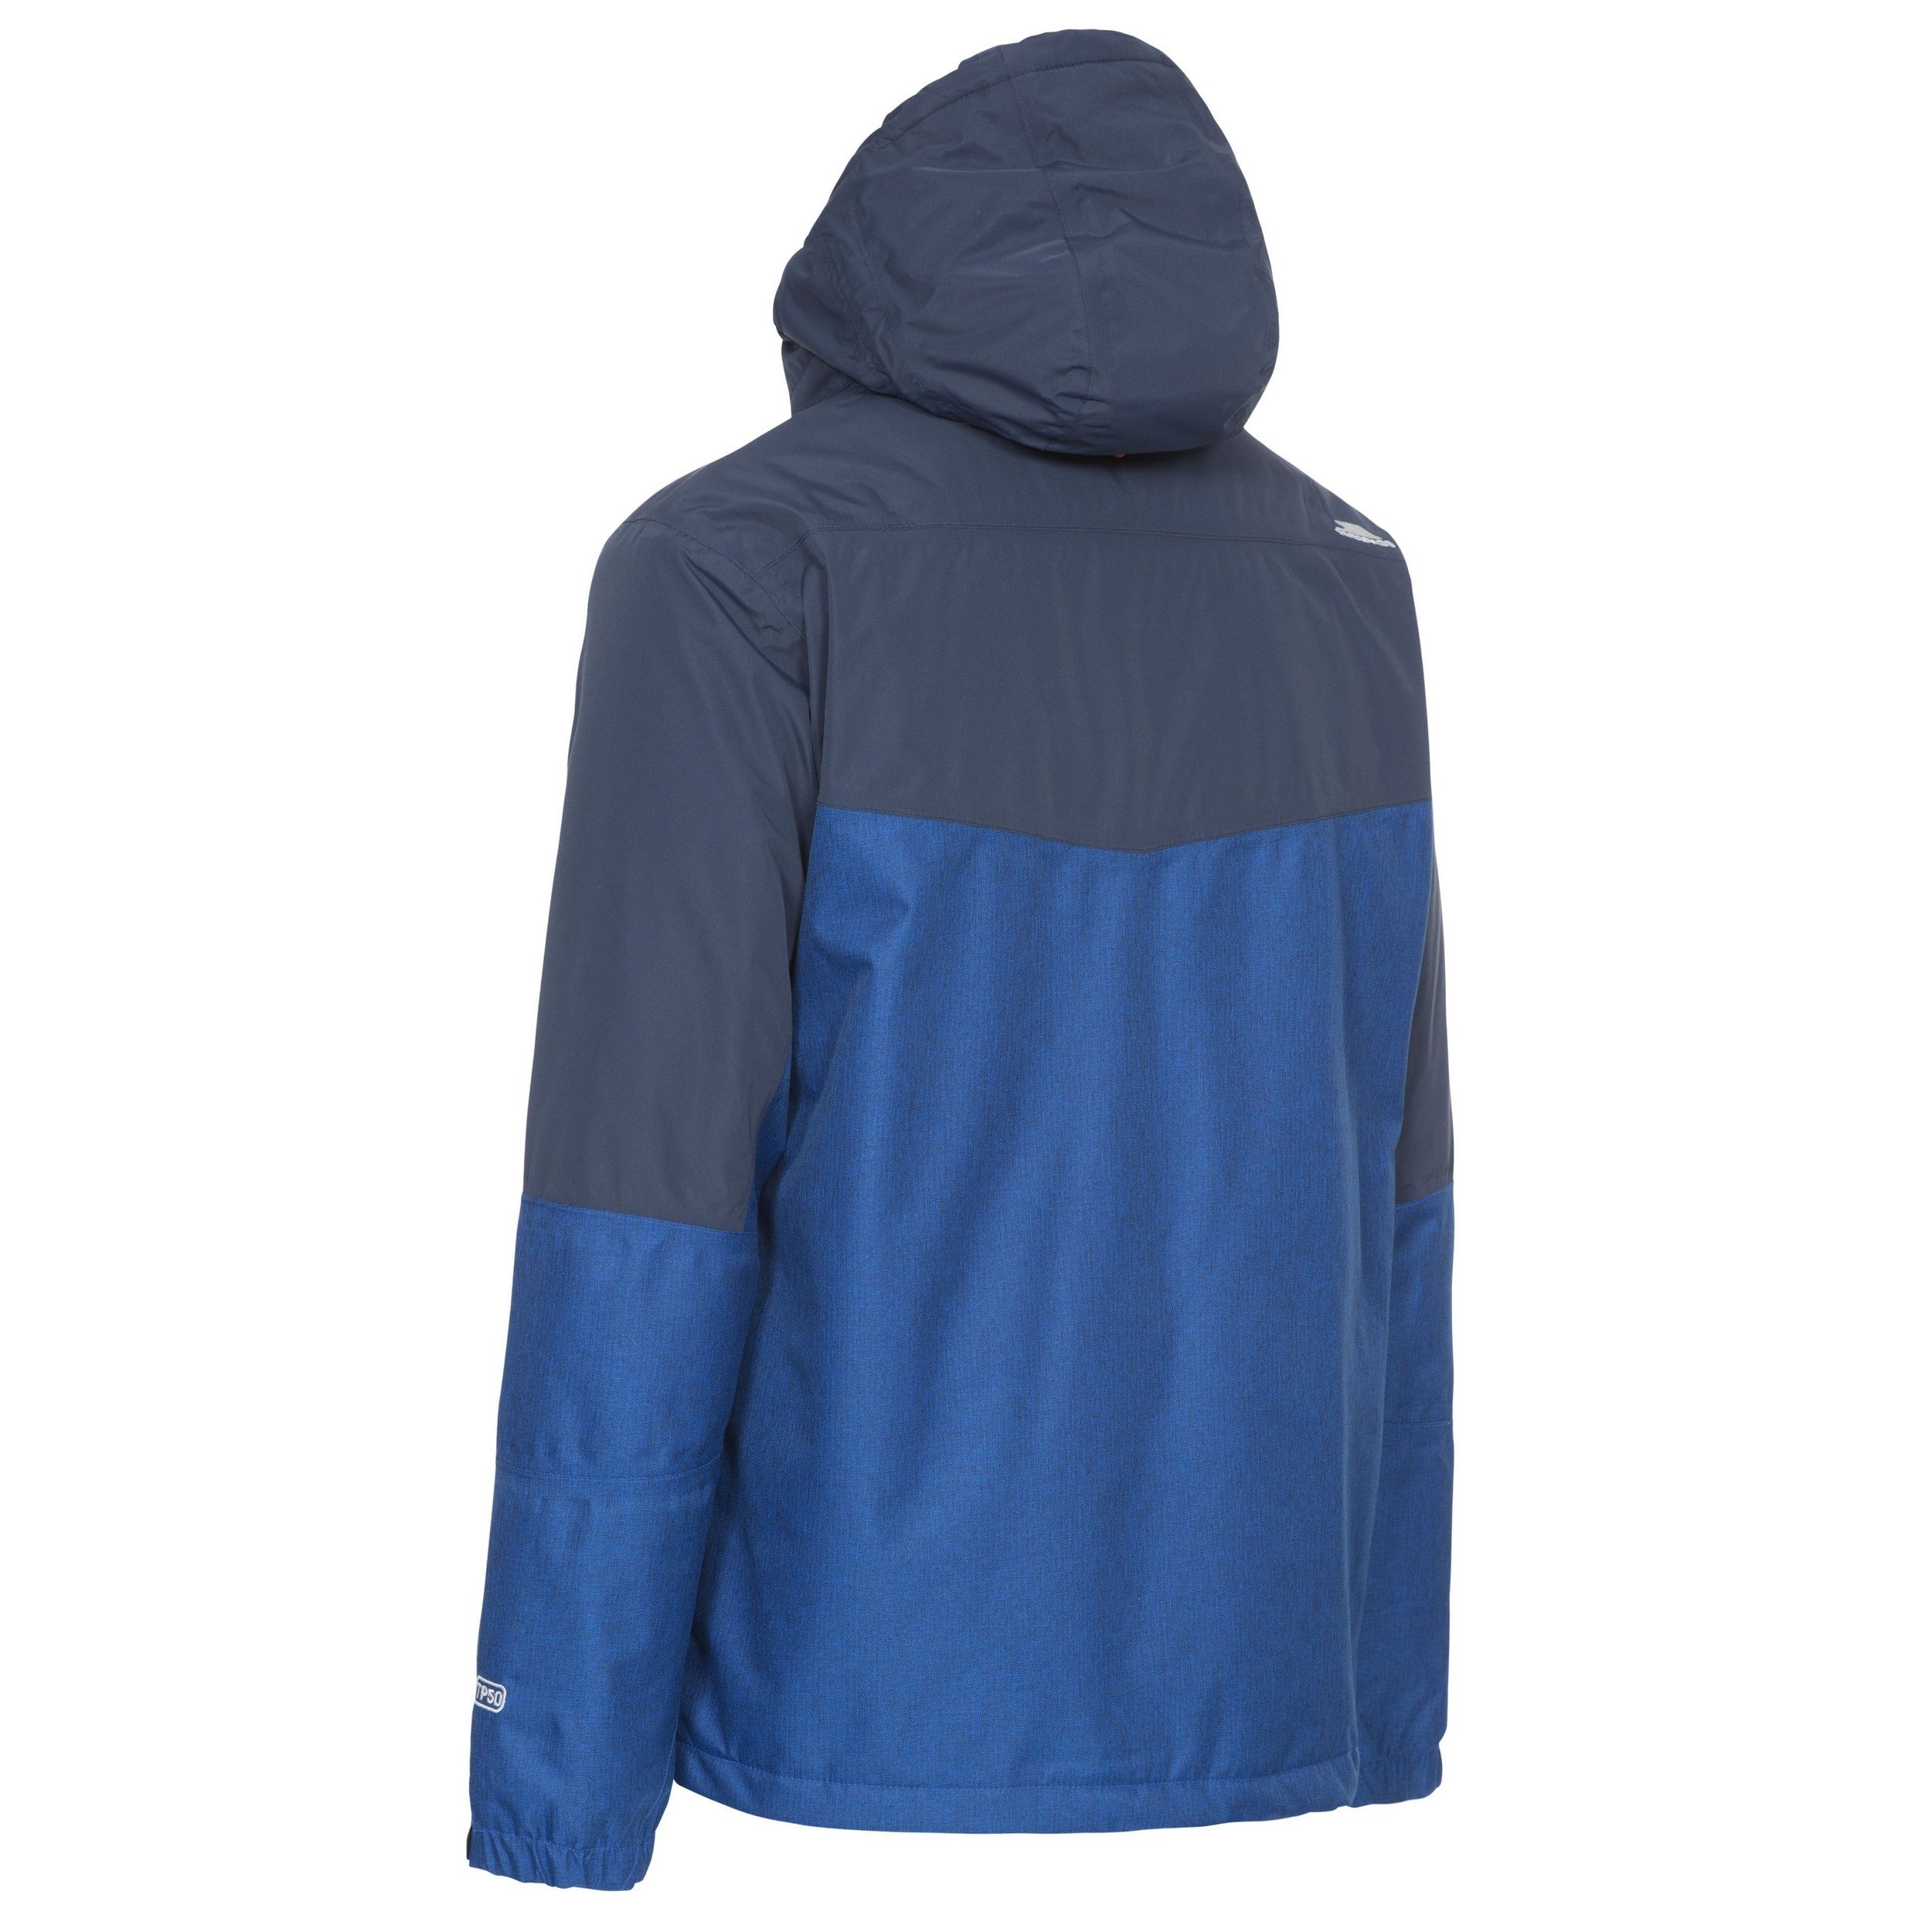 A great jacket that will give you the coverage you need on the slopes, the Bear mens ski jacket is suitable for both skiing and snowboarding. Padded & waterproof up to 5000mm. Upper body tricot lining. Adjustable zip off hood. Material: Shell: 100% Polyester TPU Membrane. Lining: 100% Polyester. Filling: 100% Polyester. Trespass Mens Chest Sizing (approx): S - 35-37in/89-94cm, M - 38-40in/96.5-101.5cm, L - 41-43in/104-109cm, XL - 44-46in/111.5-117cm, XXL - 46-48in/117-122cm, 3XL - 48-50in/122-127cm.